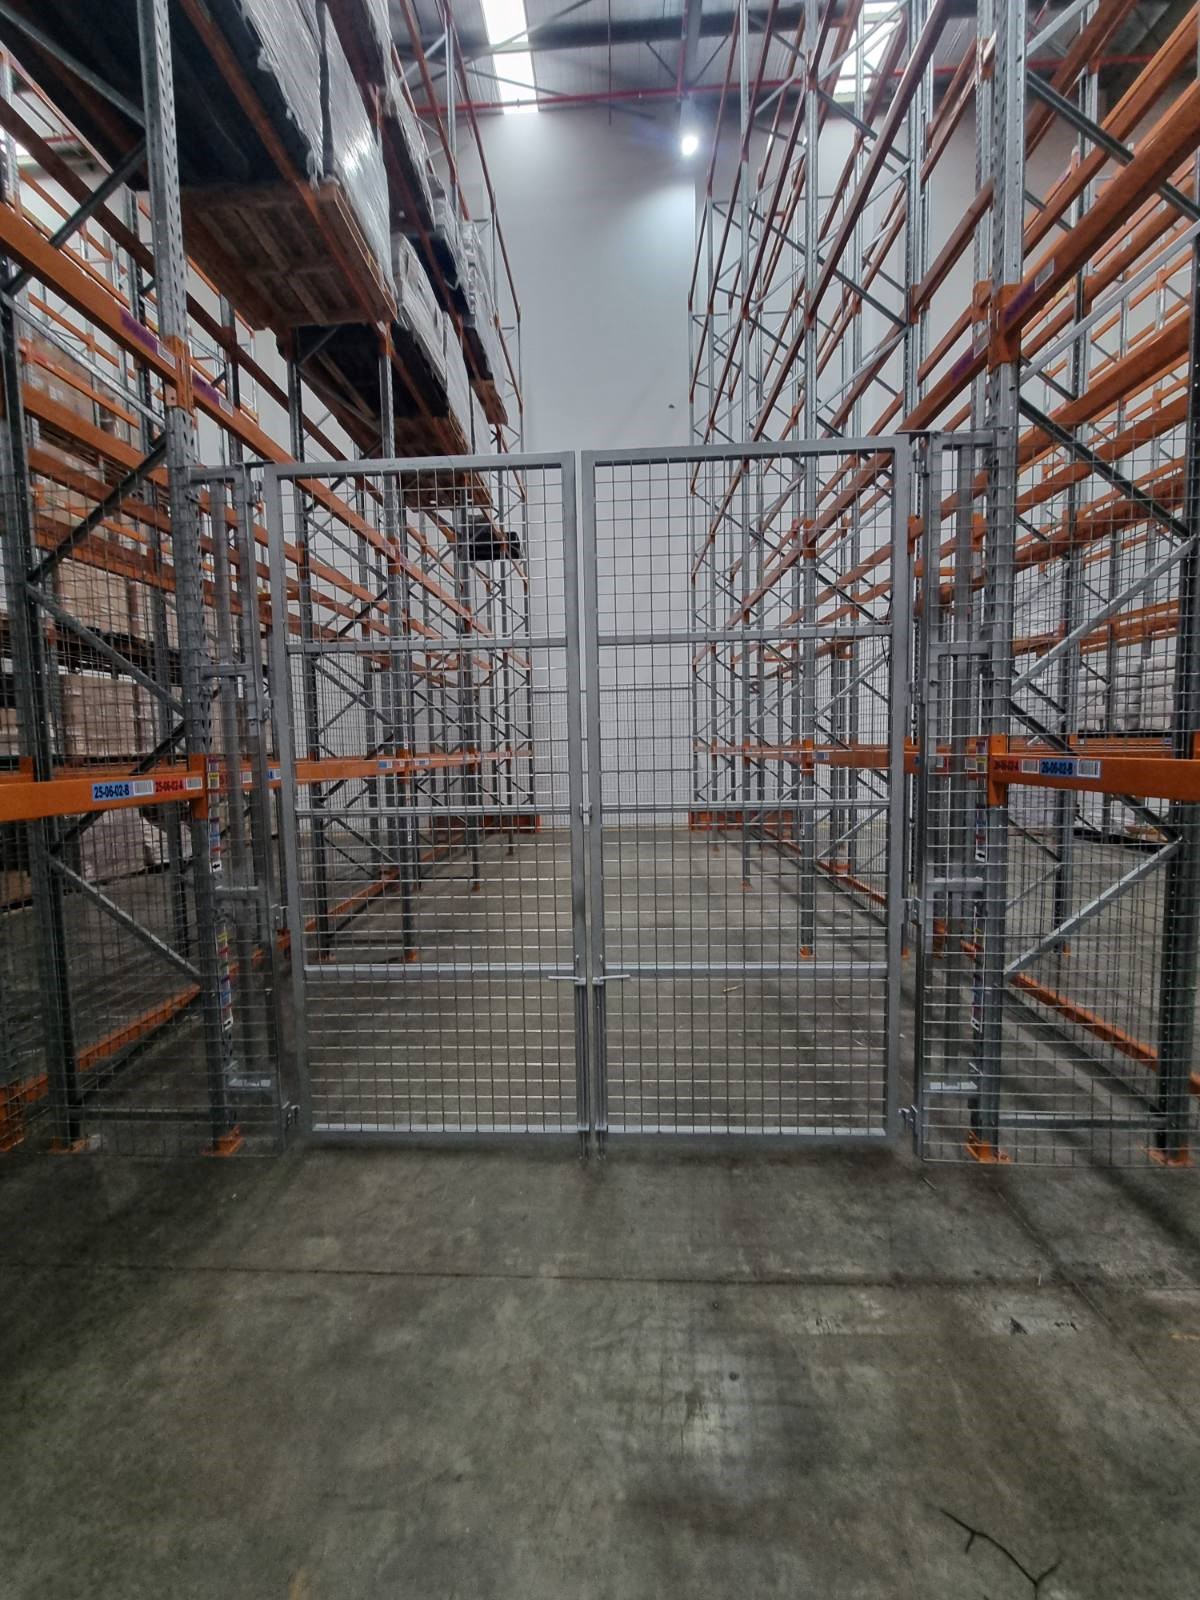 Custom fabricated steel security gate in a warehouse filled with pallet racking.